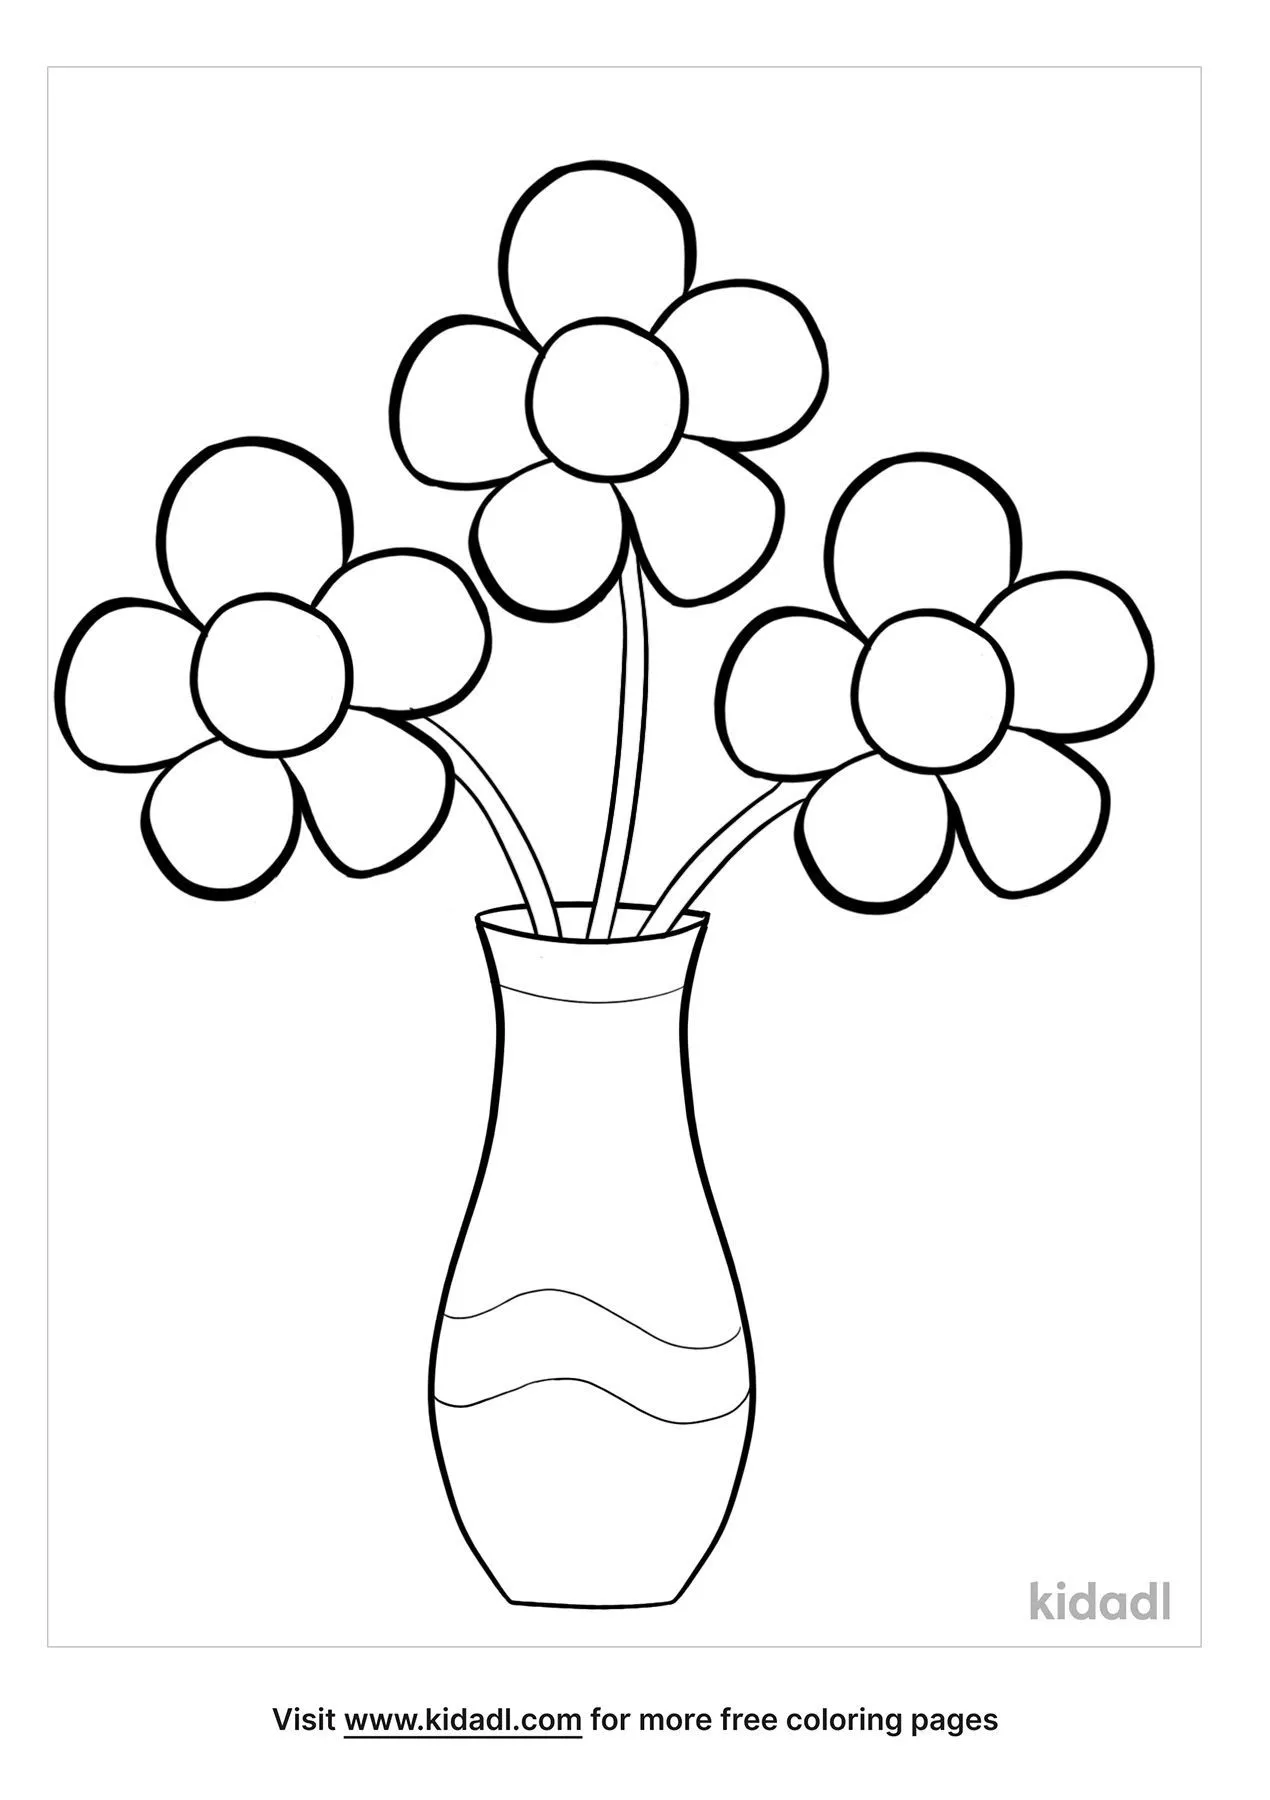 Flower Vase Coloring Pages   Free Flowers Coloring Pages   Kidadl